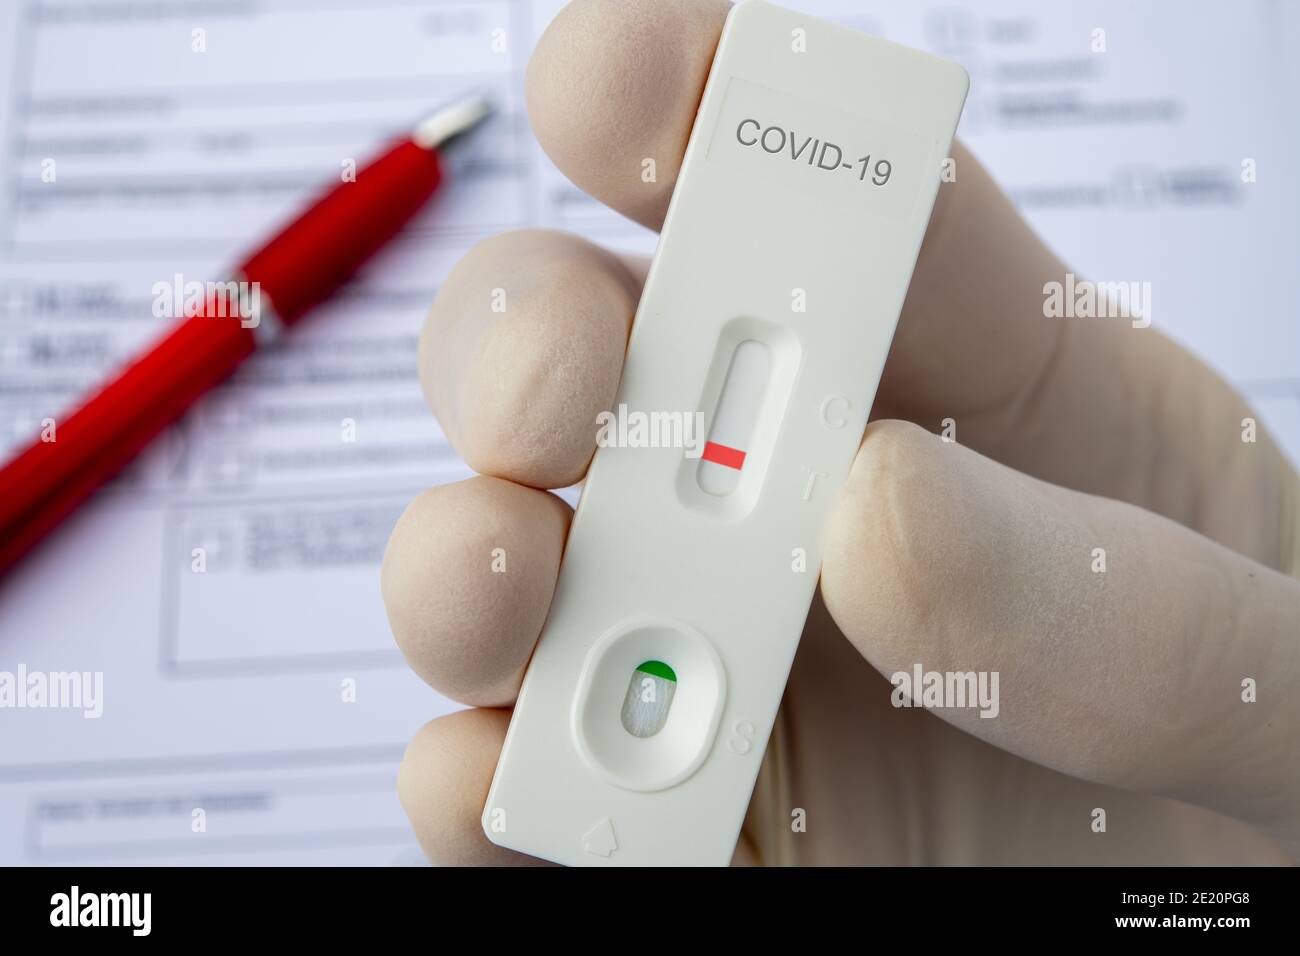 Covid-19, hand in glove and test sticks Stock Photo